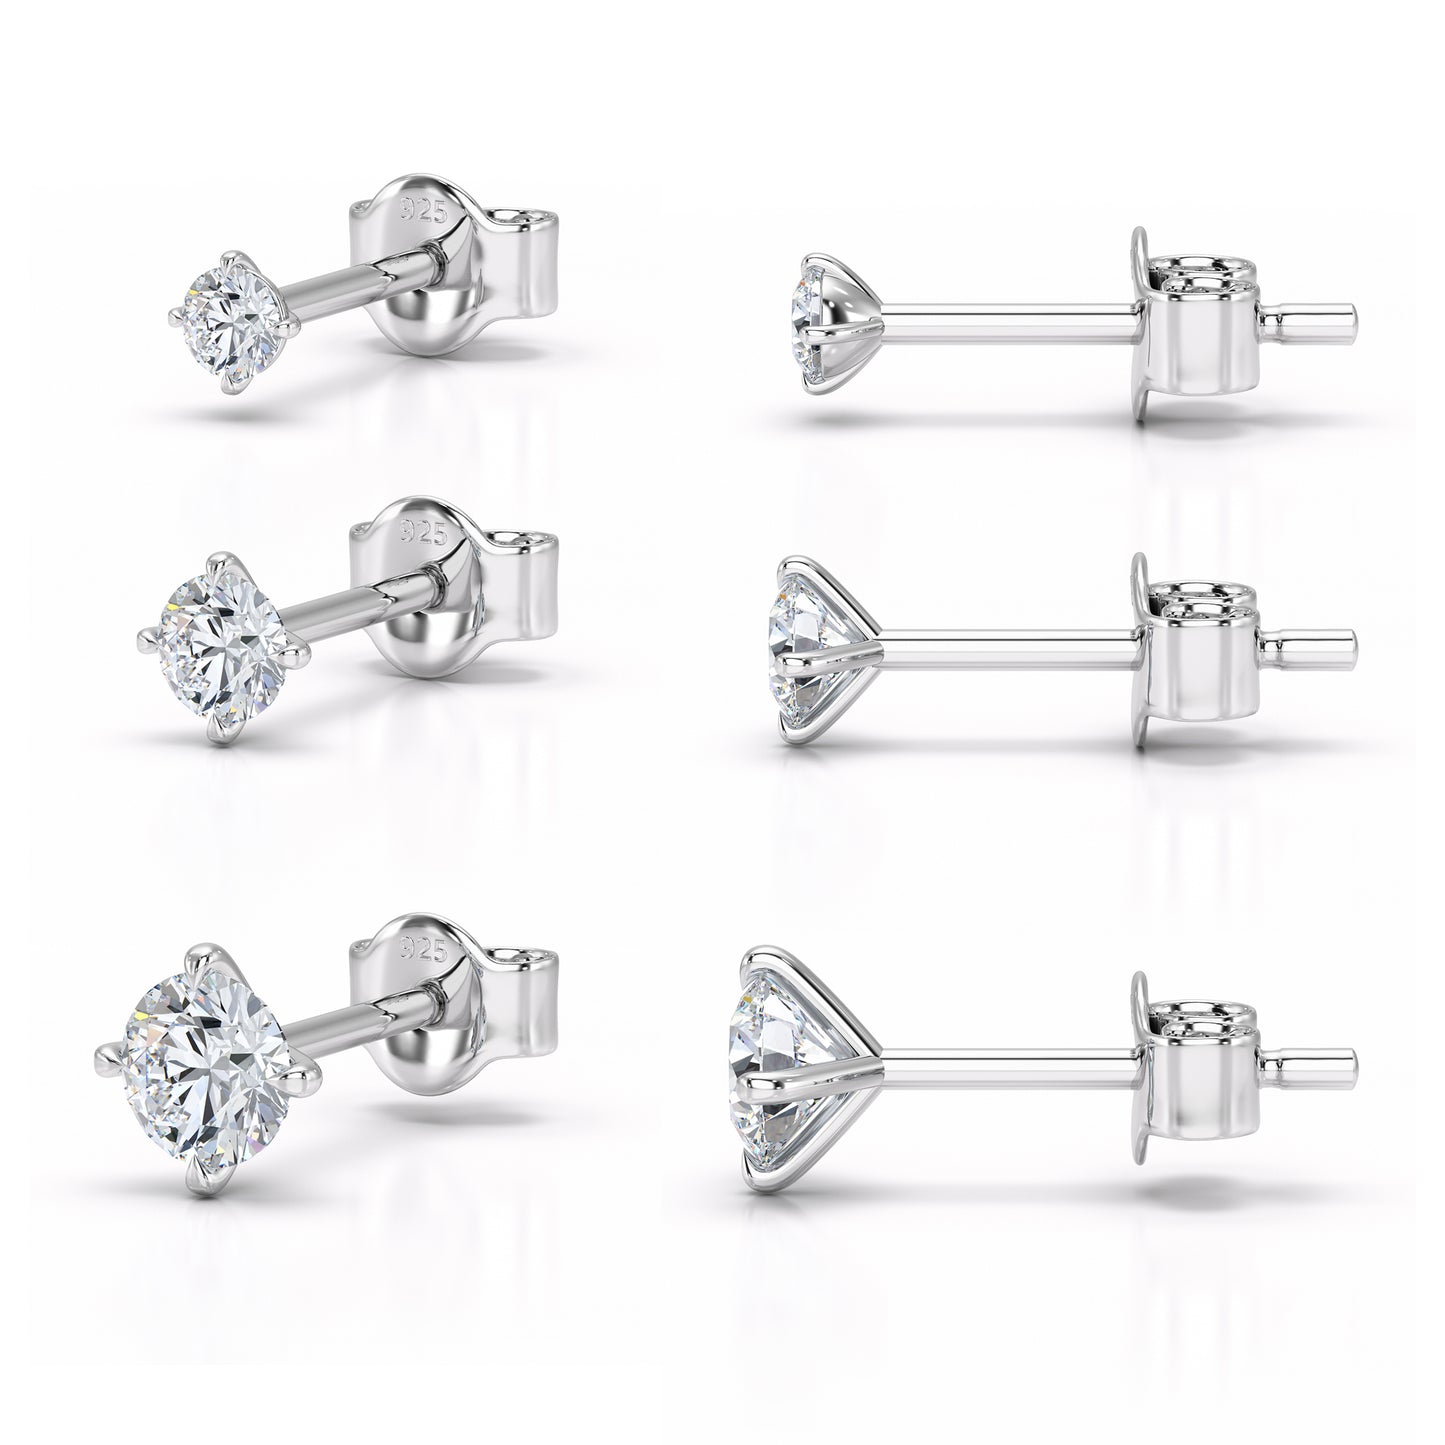 Elevate Your Style with Heather Needham Silver's 925 Sterling Silver Cubic Zirconia Stud Earrings Jewellery Set